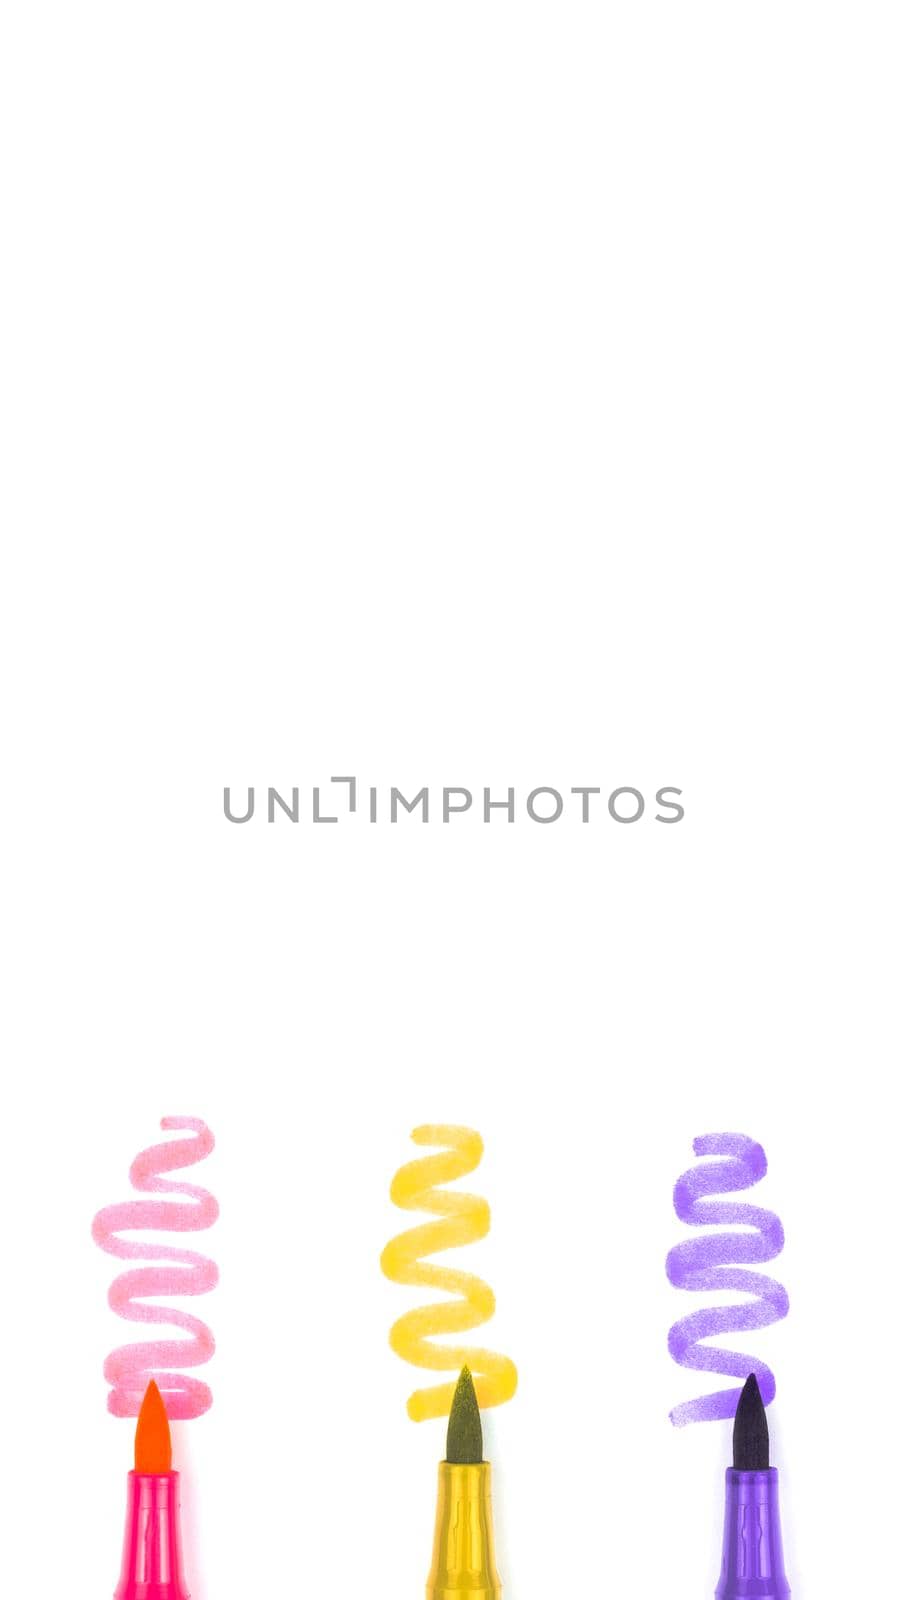 Three multicolored markers on a white background with copy space by lunarts